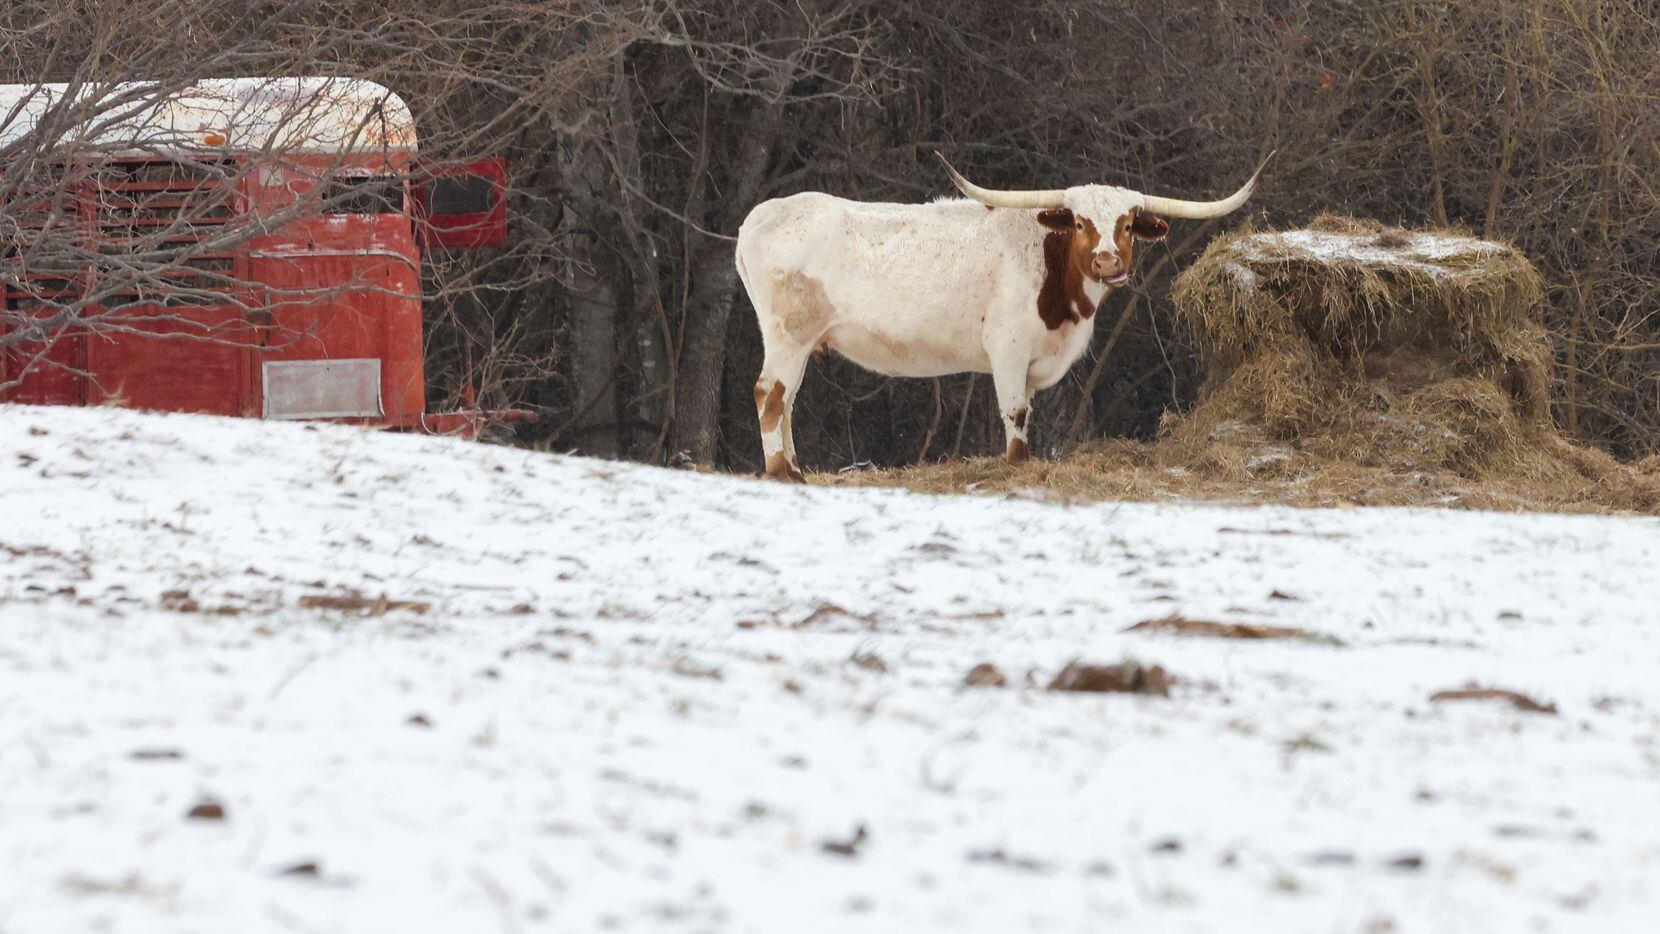 A longhorn chews on hay in a snow-covered field along Justin Road in Copper Canyon, near...